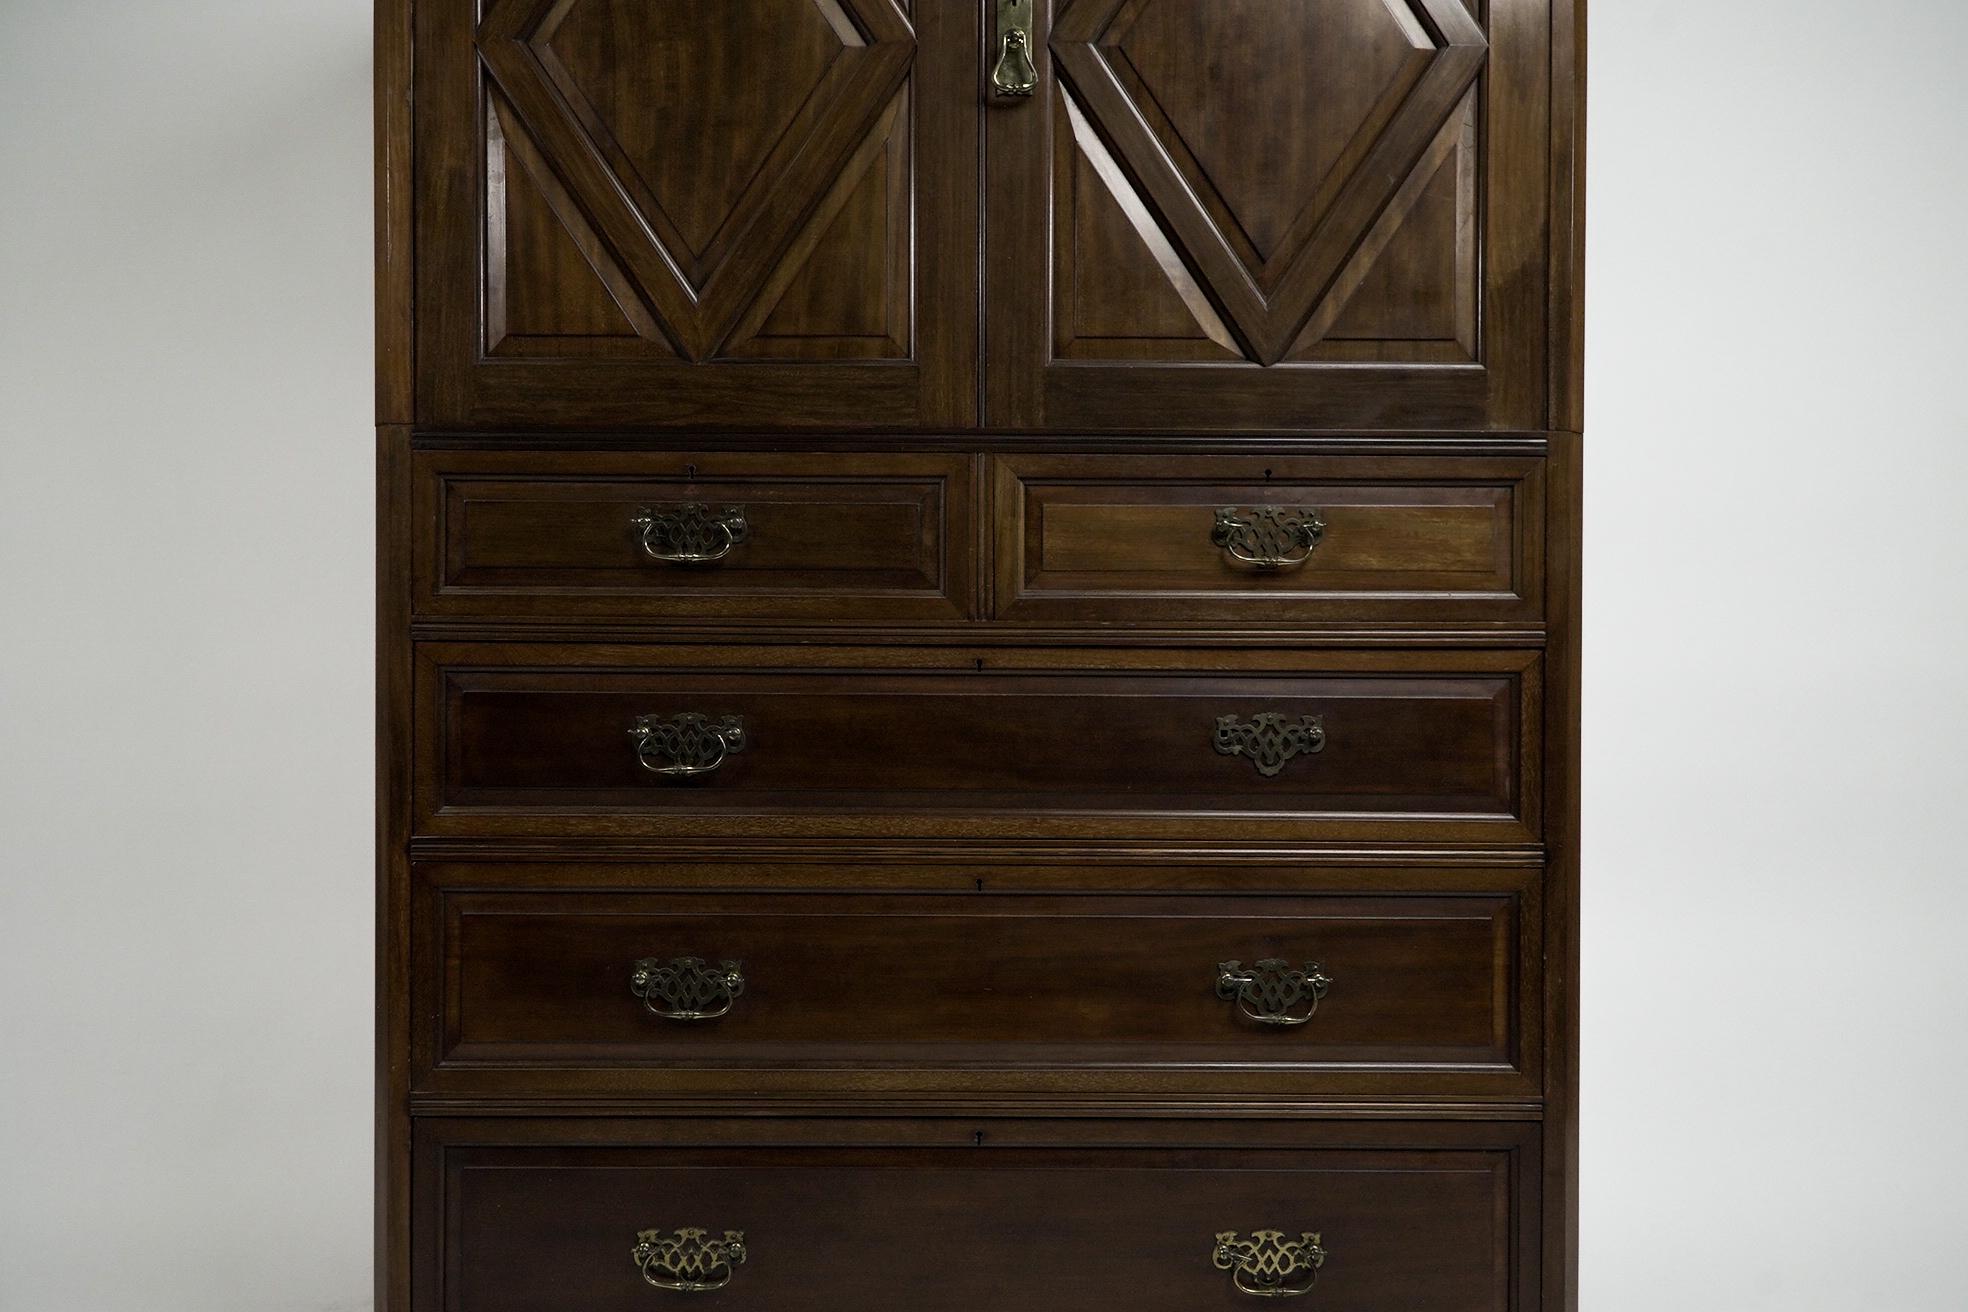 Morris & Co. An Aesthetic Movement Walnut tallboy with internal sliding drawers. For Sale 4